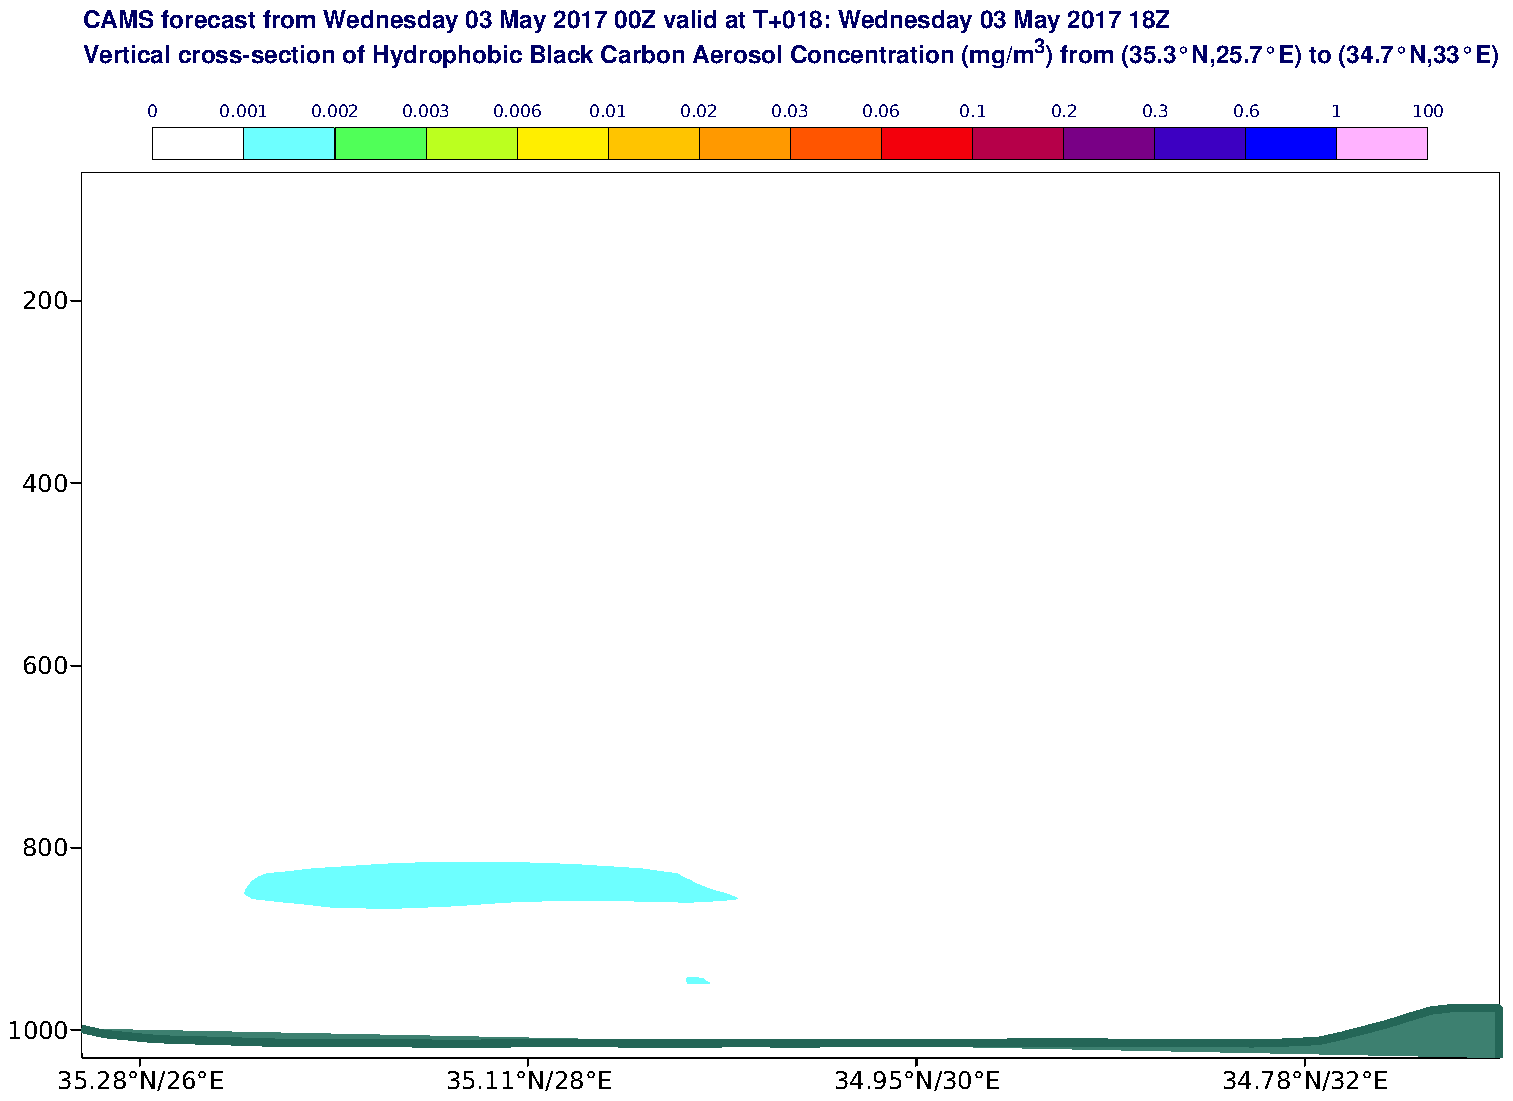 Vertical cross-section of Hydrophobic Black Carbon Aerosol Concentration (mg/m3) valid at T18 - 2017-05-03 18:00